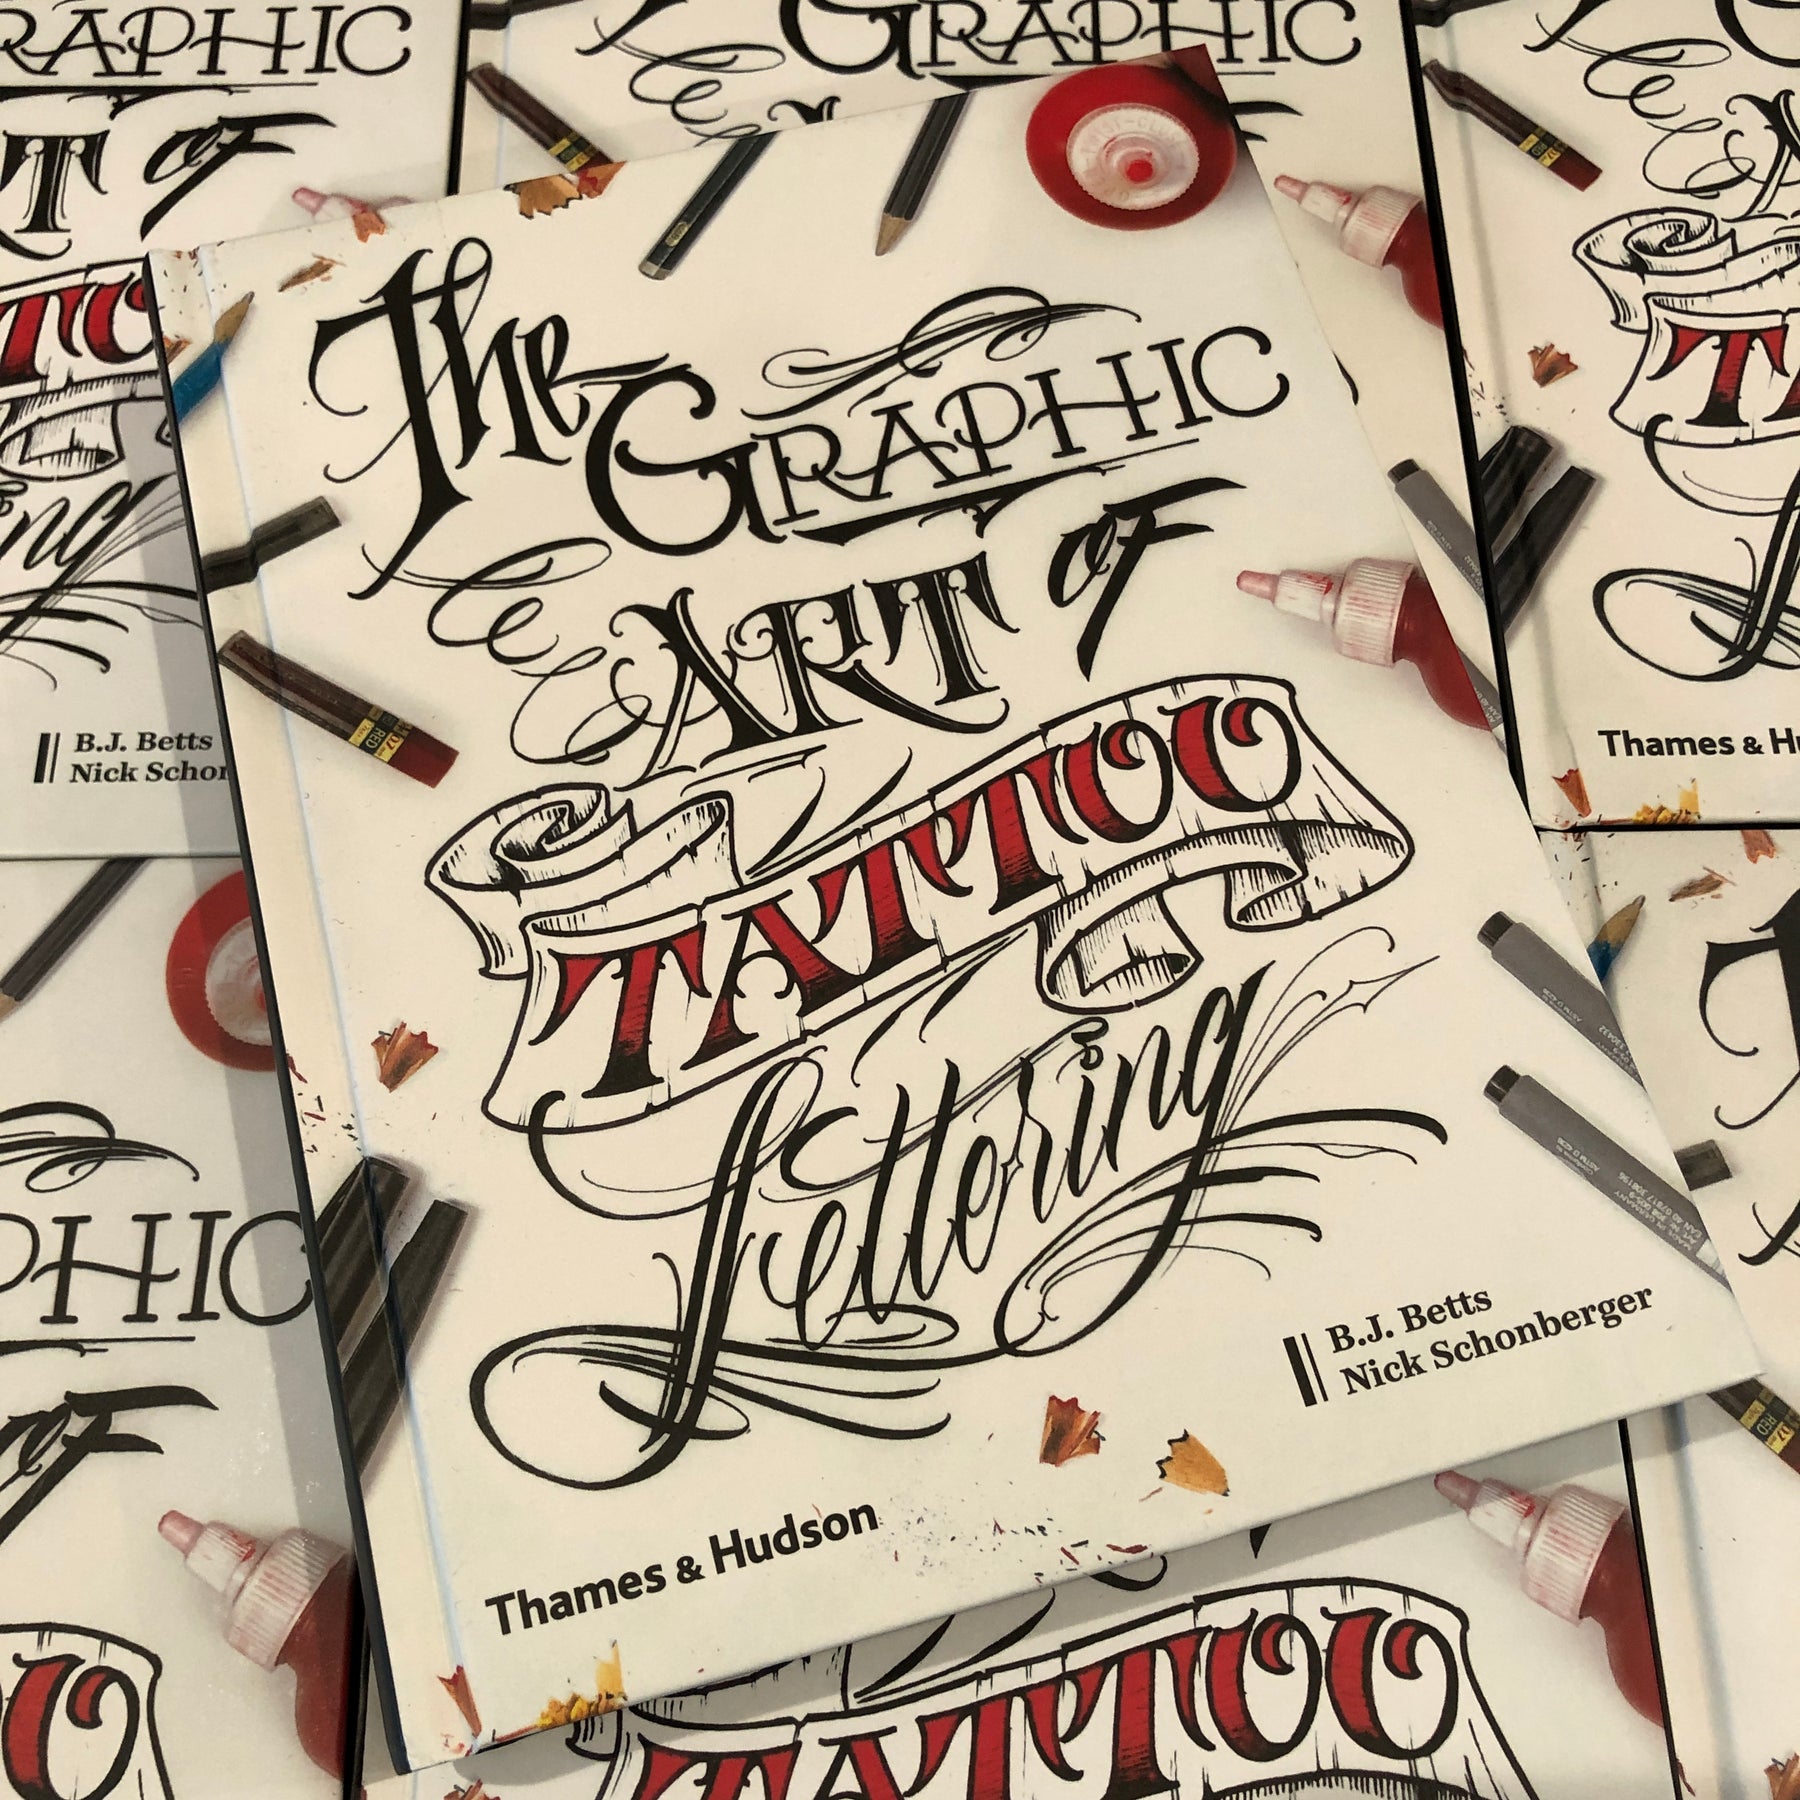 BJ Betts - The Graphic Art of Tattoo Lettering